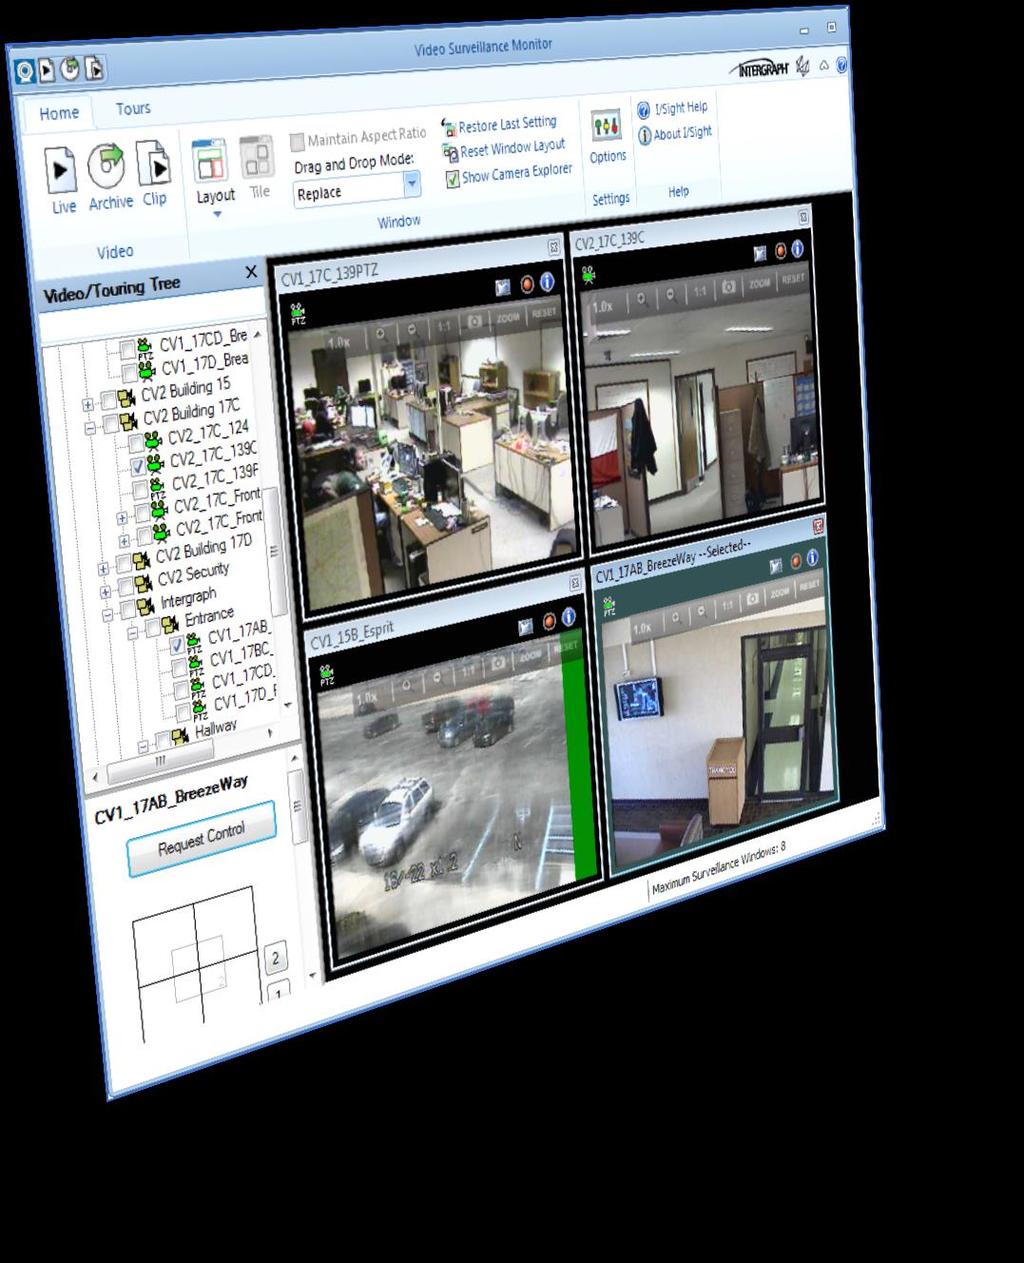 Intergraph Security Solutions: Video Surveillance & Analytics Integration Bi-Directional Interface With 3rd Party Digital Video Recorder